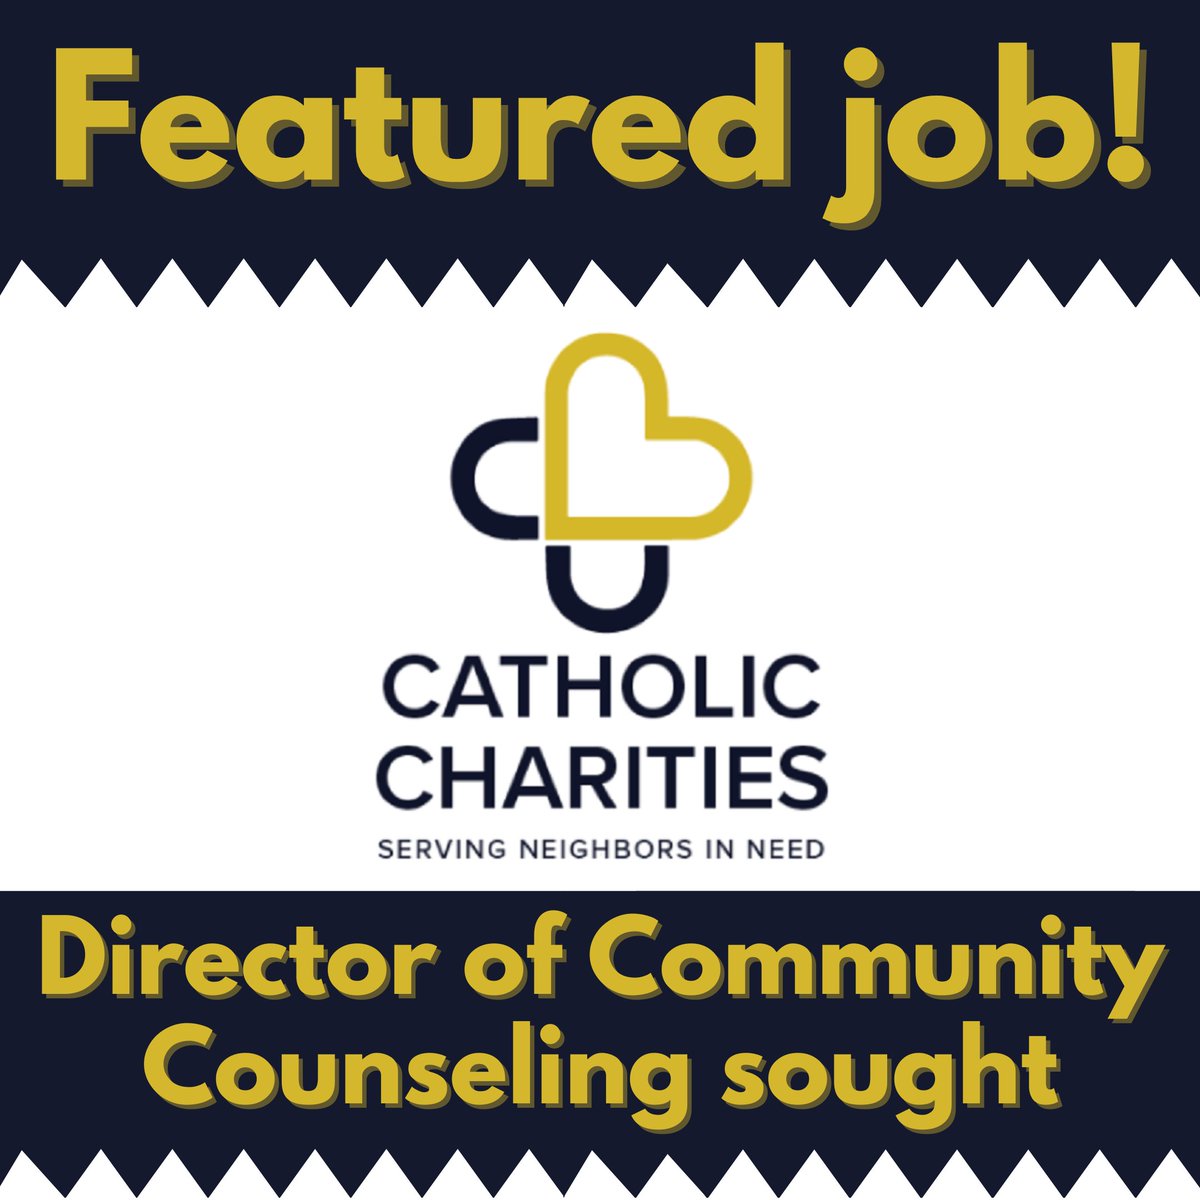 A Director of Community Counseling (learn more or apply 👉 tinyurl.com/ccdccjob ) is sought by Catholic Charities in #Milwaukee. Apply today for this important #job opening! #NonprofitJobs #MKE #MKEjobs #MilwaukeeWI #MilwaukeeJobs #SocialWorkJobs #CounselingJobs #MSWjobs #WI